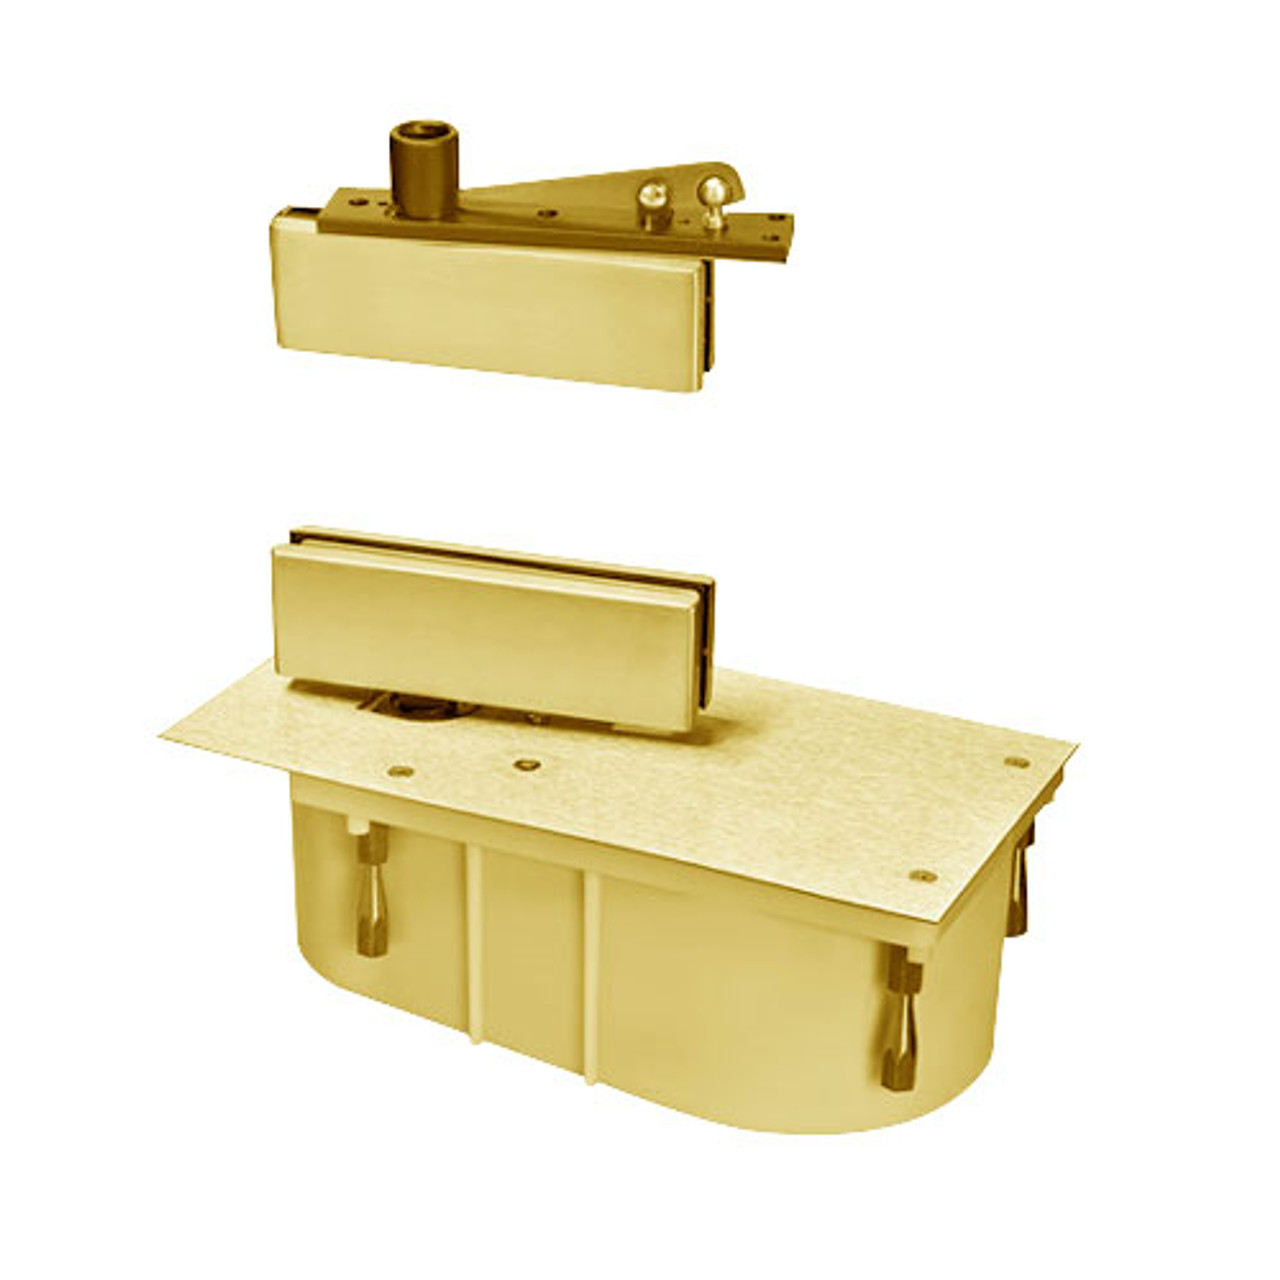 428-95S-CWF-LH-605 Rixson 428 Series Heavy Duty Single Acting Center Hung Floor Closer with Patch Fittings in Bright Brass Finish